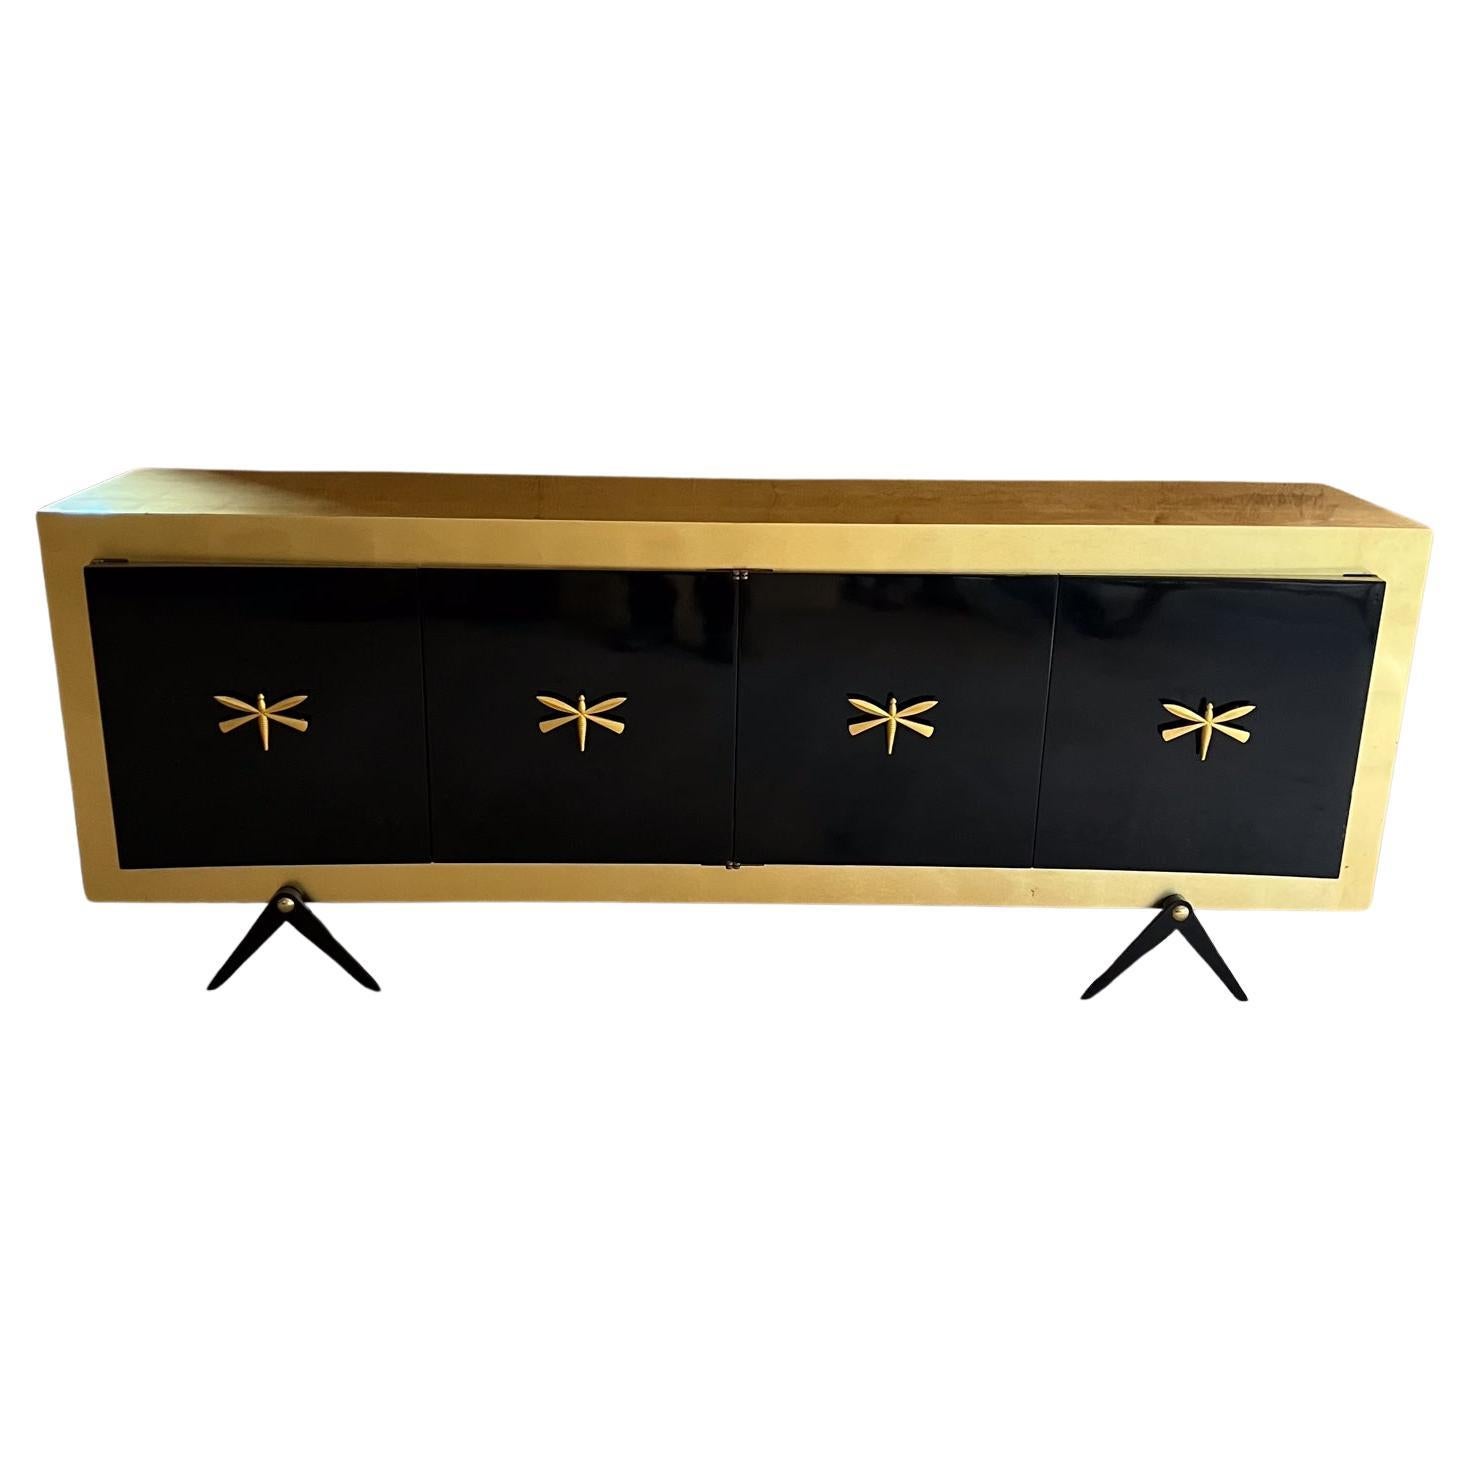 1950s Arturo Pani Black Dragonfly Credenza with Gold Leaf